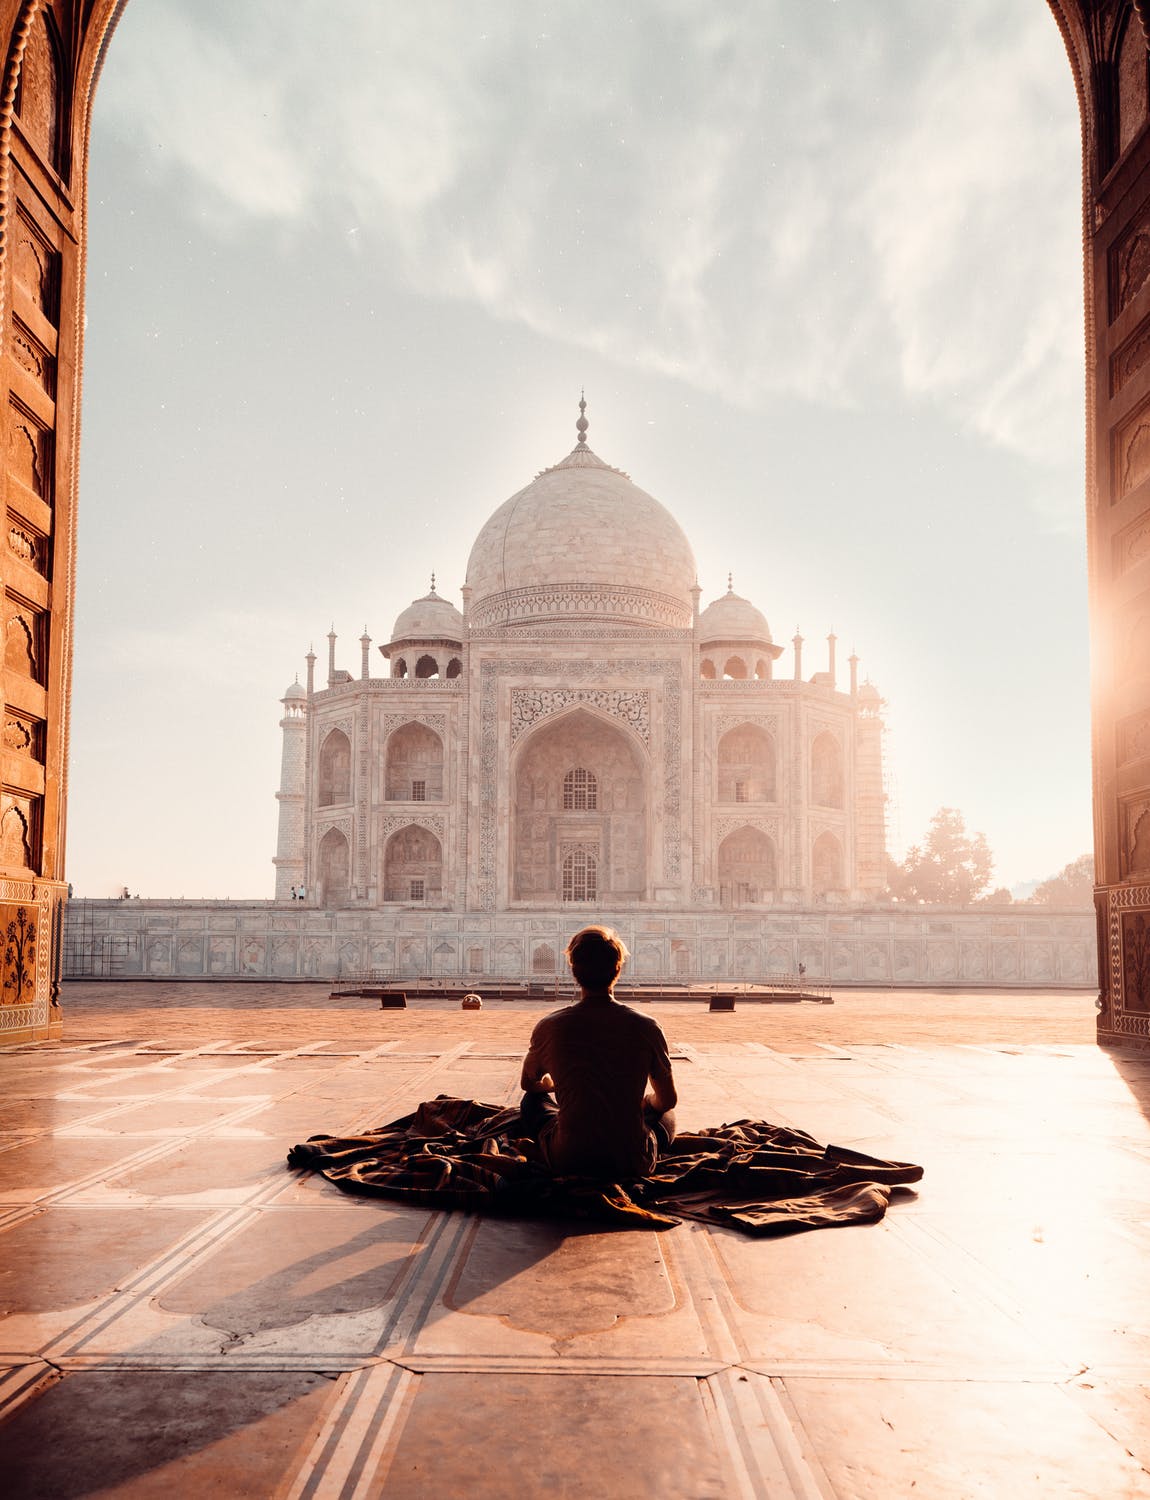 India Trip Planning! A Guide on Popular Destinations